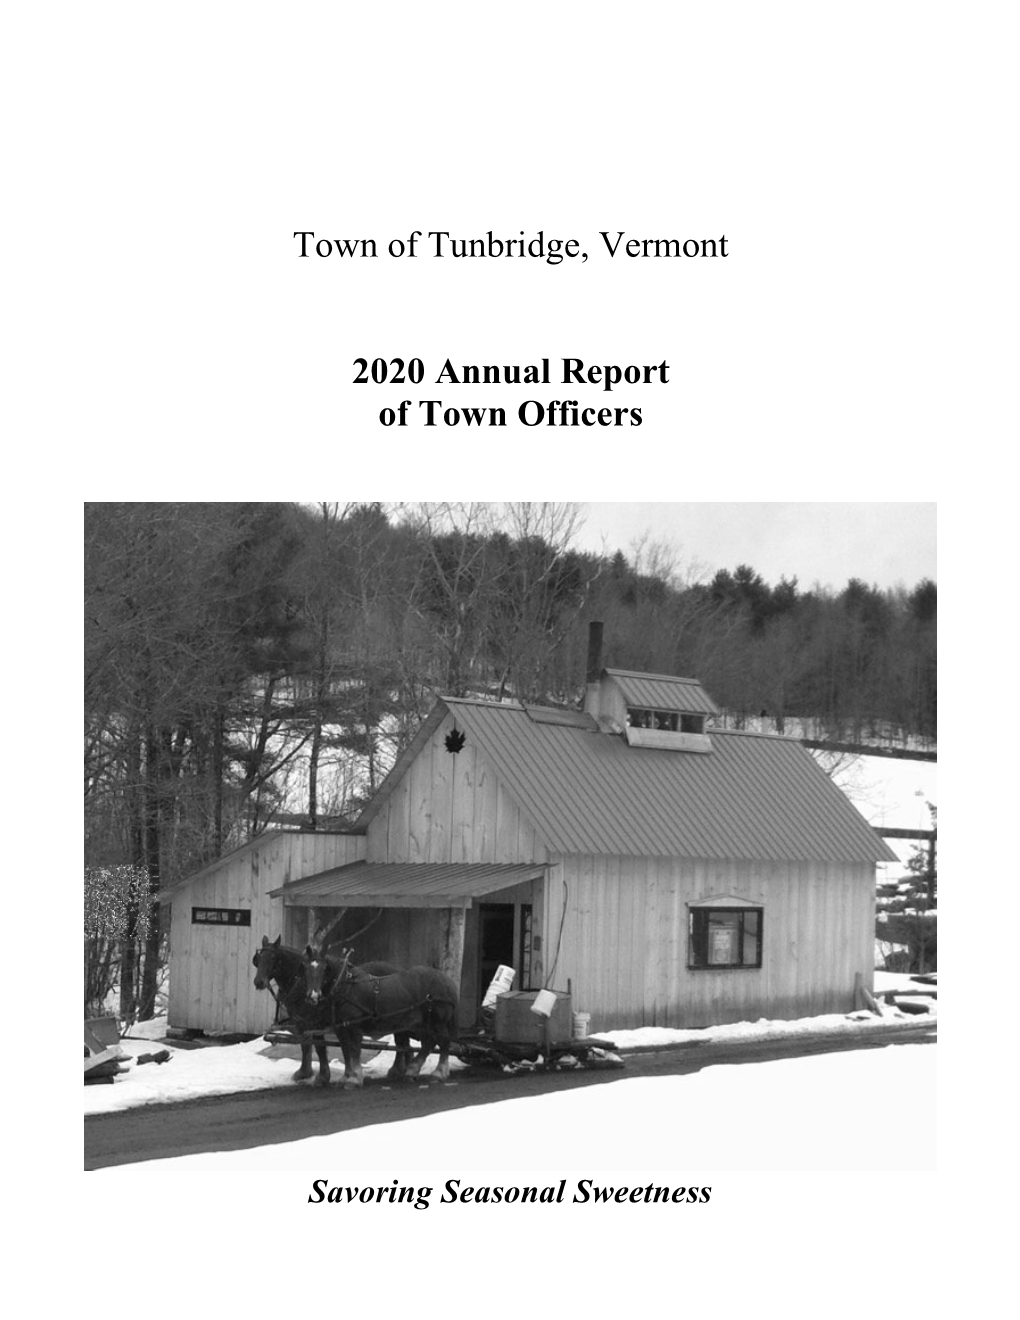 Town of Tunbridge, Vermont 2020 Annual Report of Town Officers